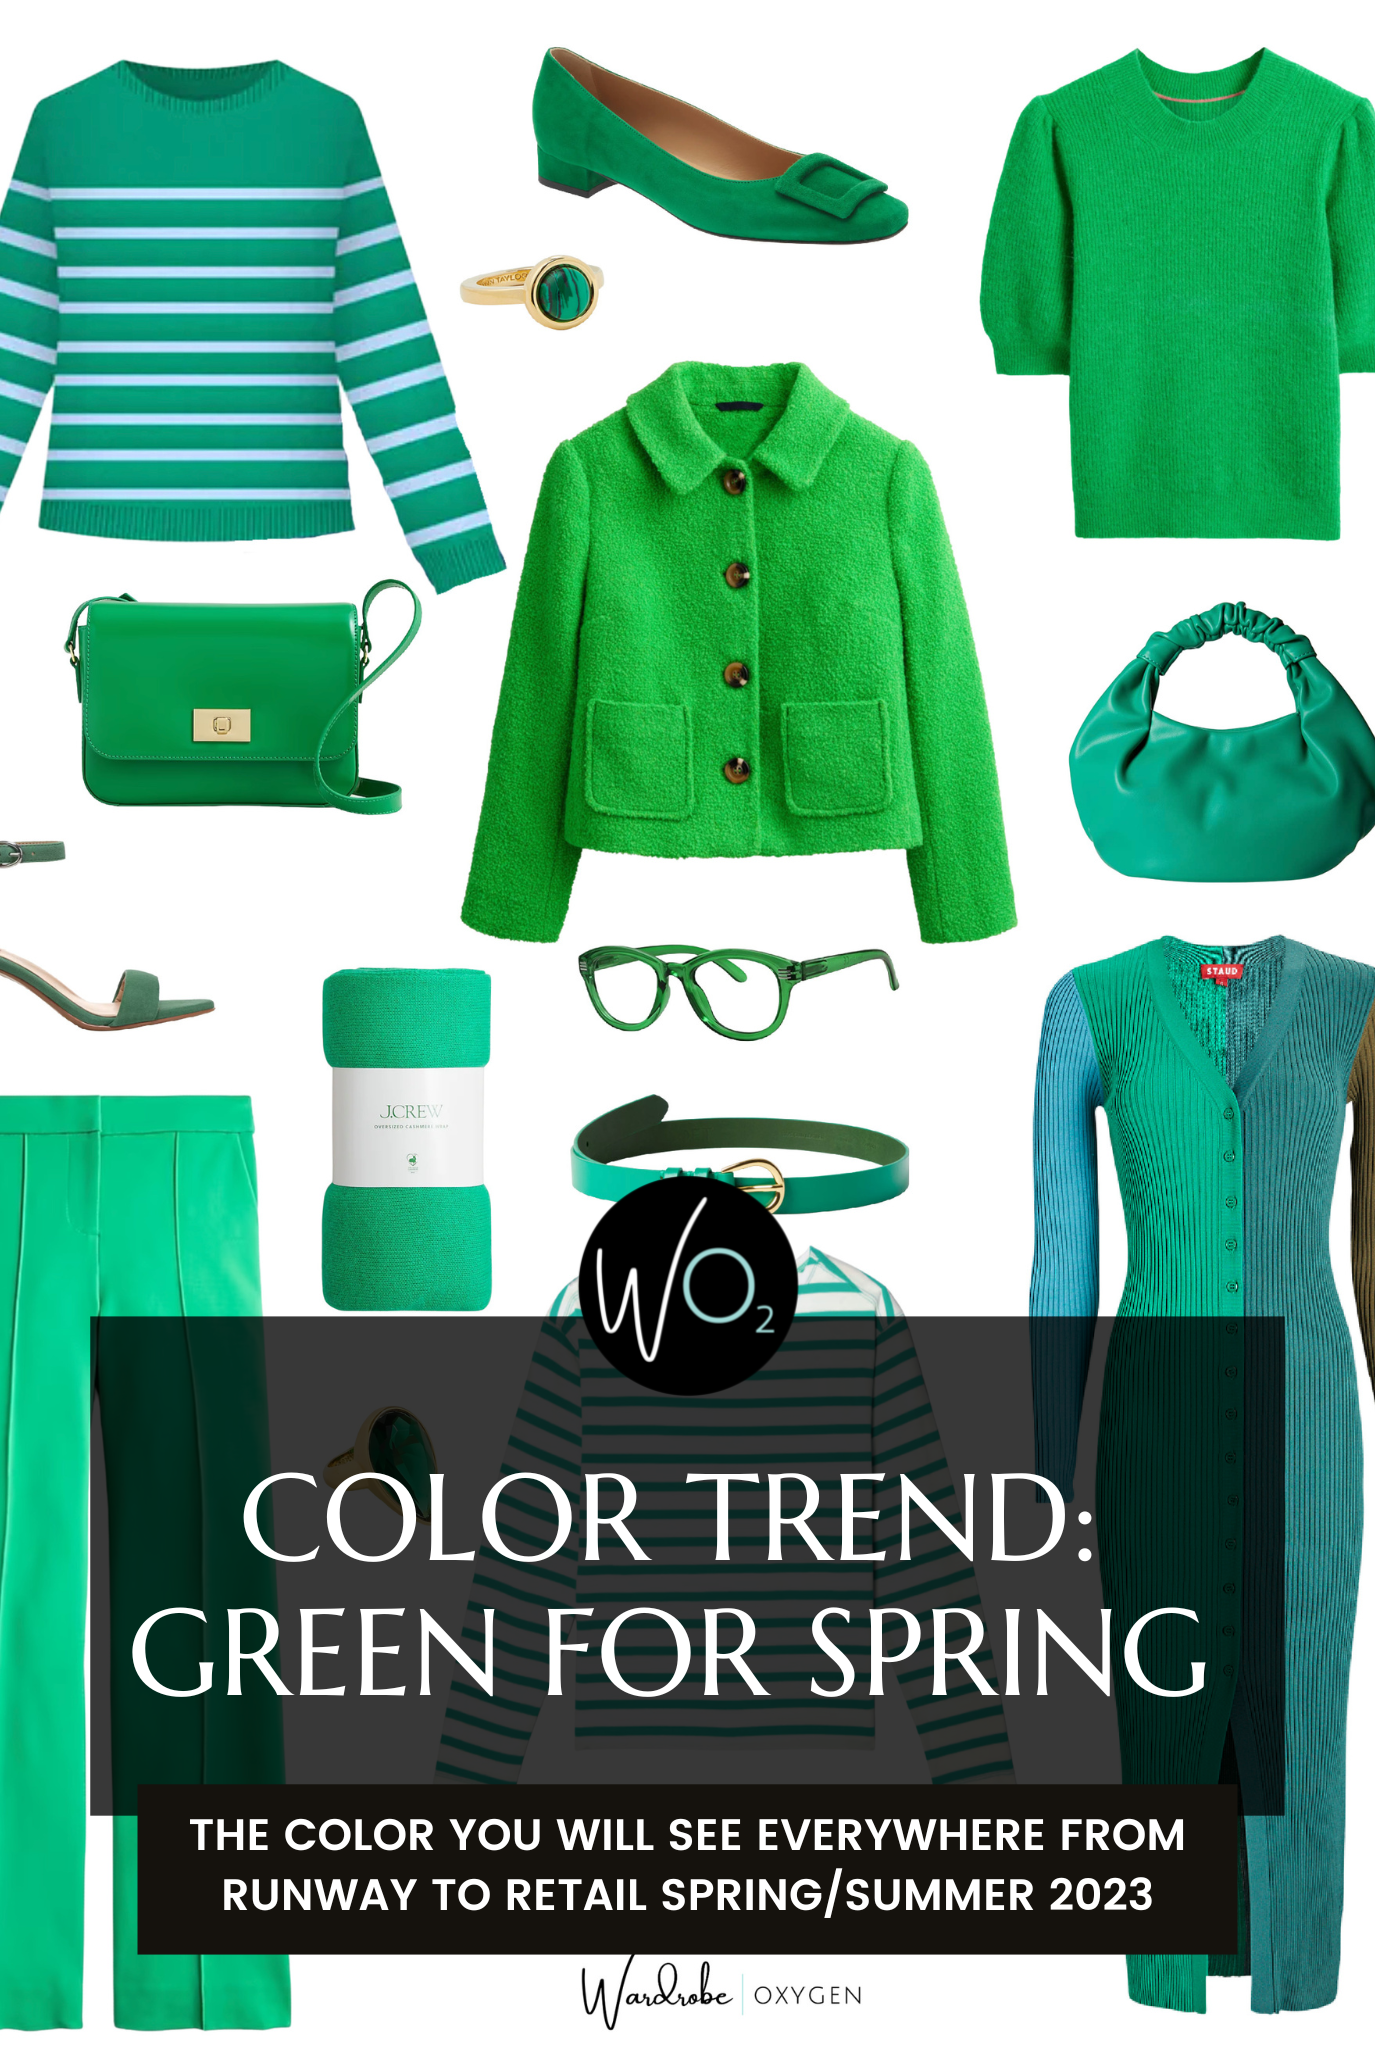 The 2023 Color Trend You'll See Everywhere - Wardrobe Oxygen